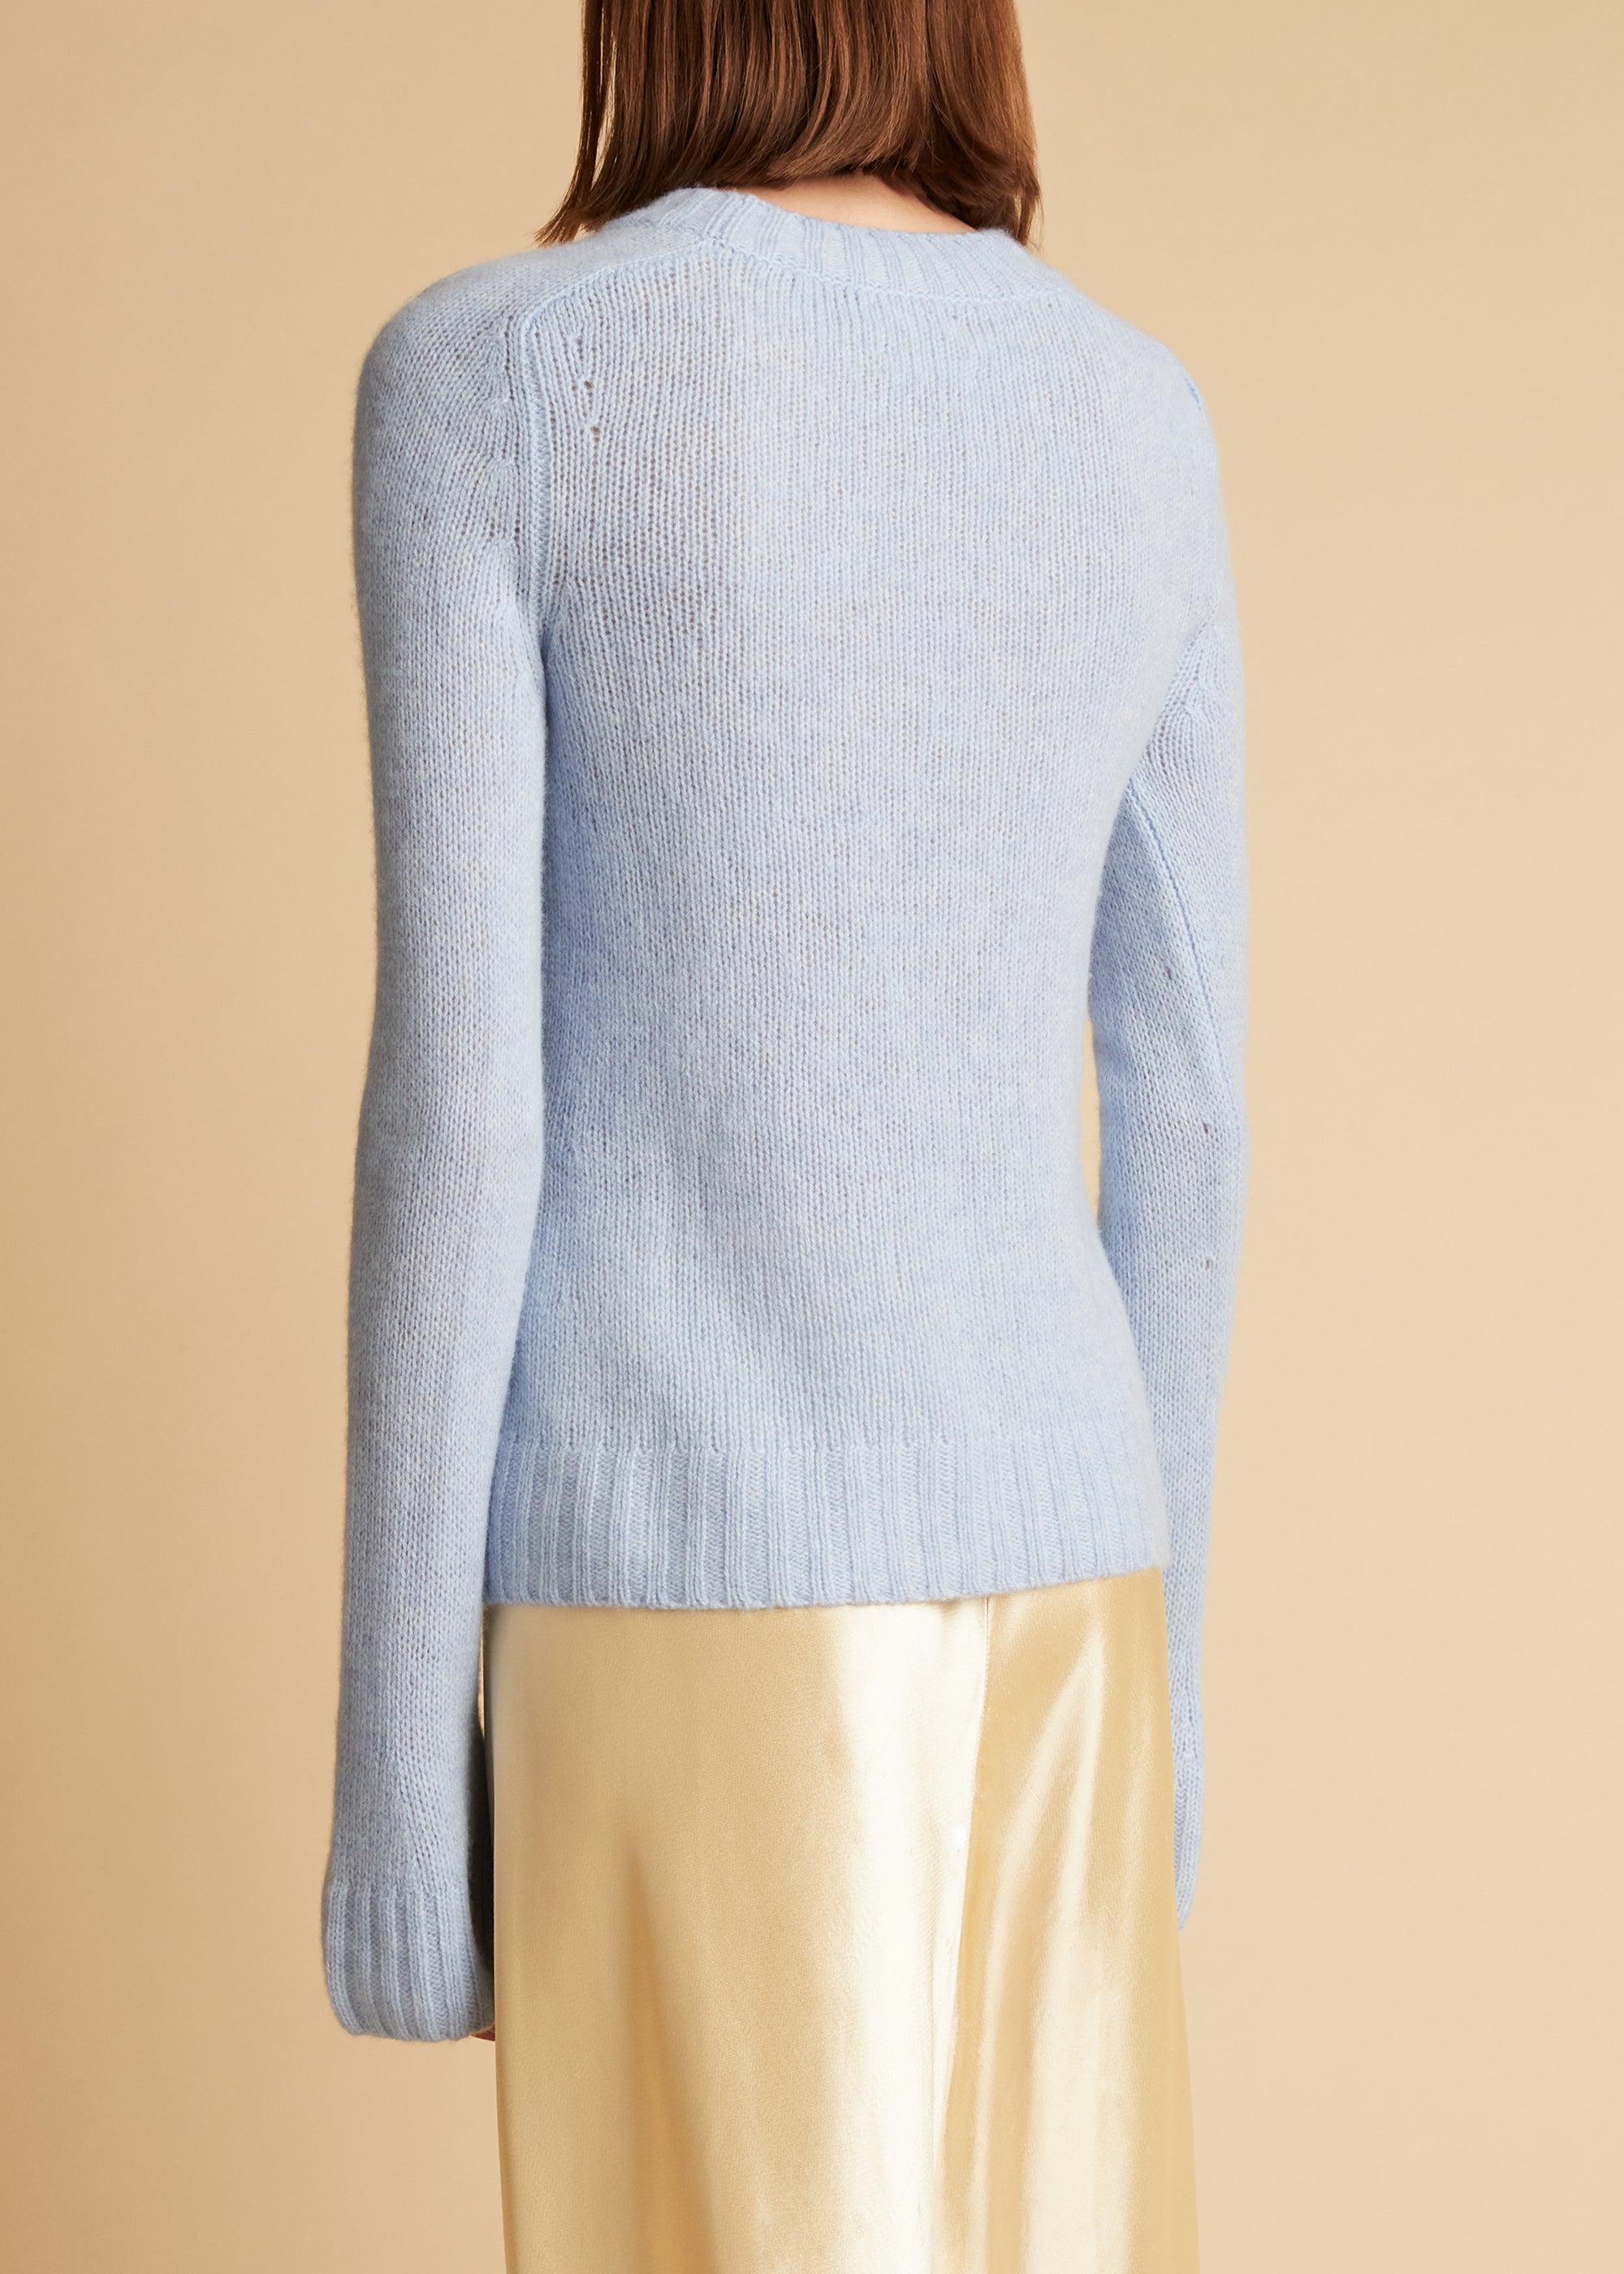 Mary Jane sweater in cashmere - Atmosphere